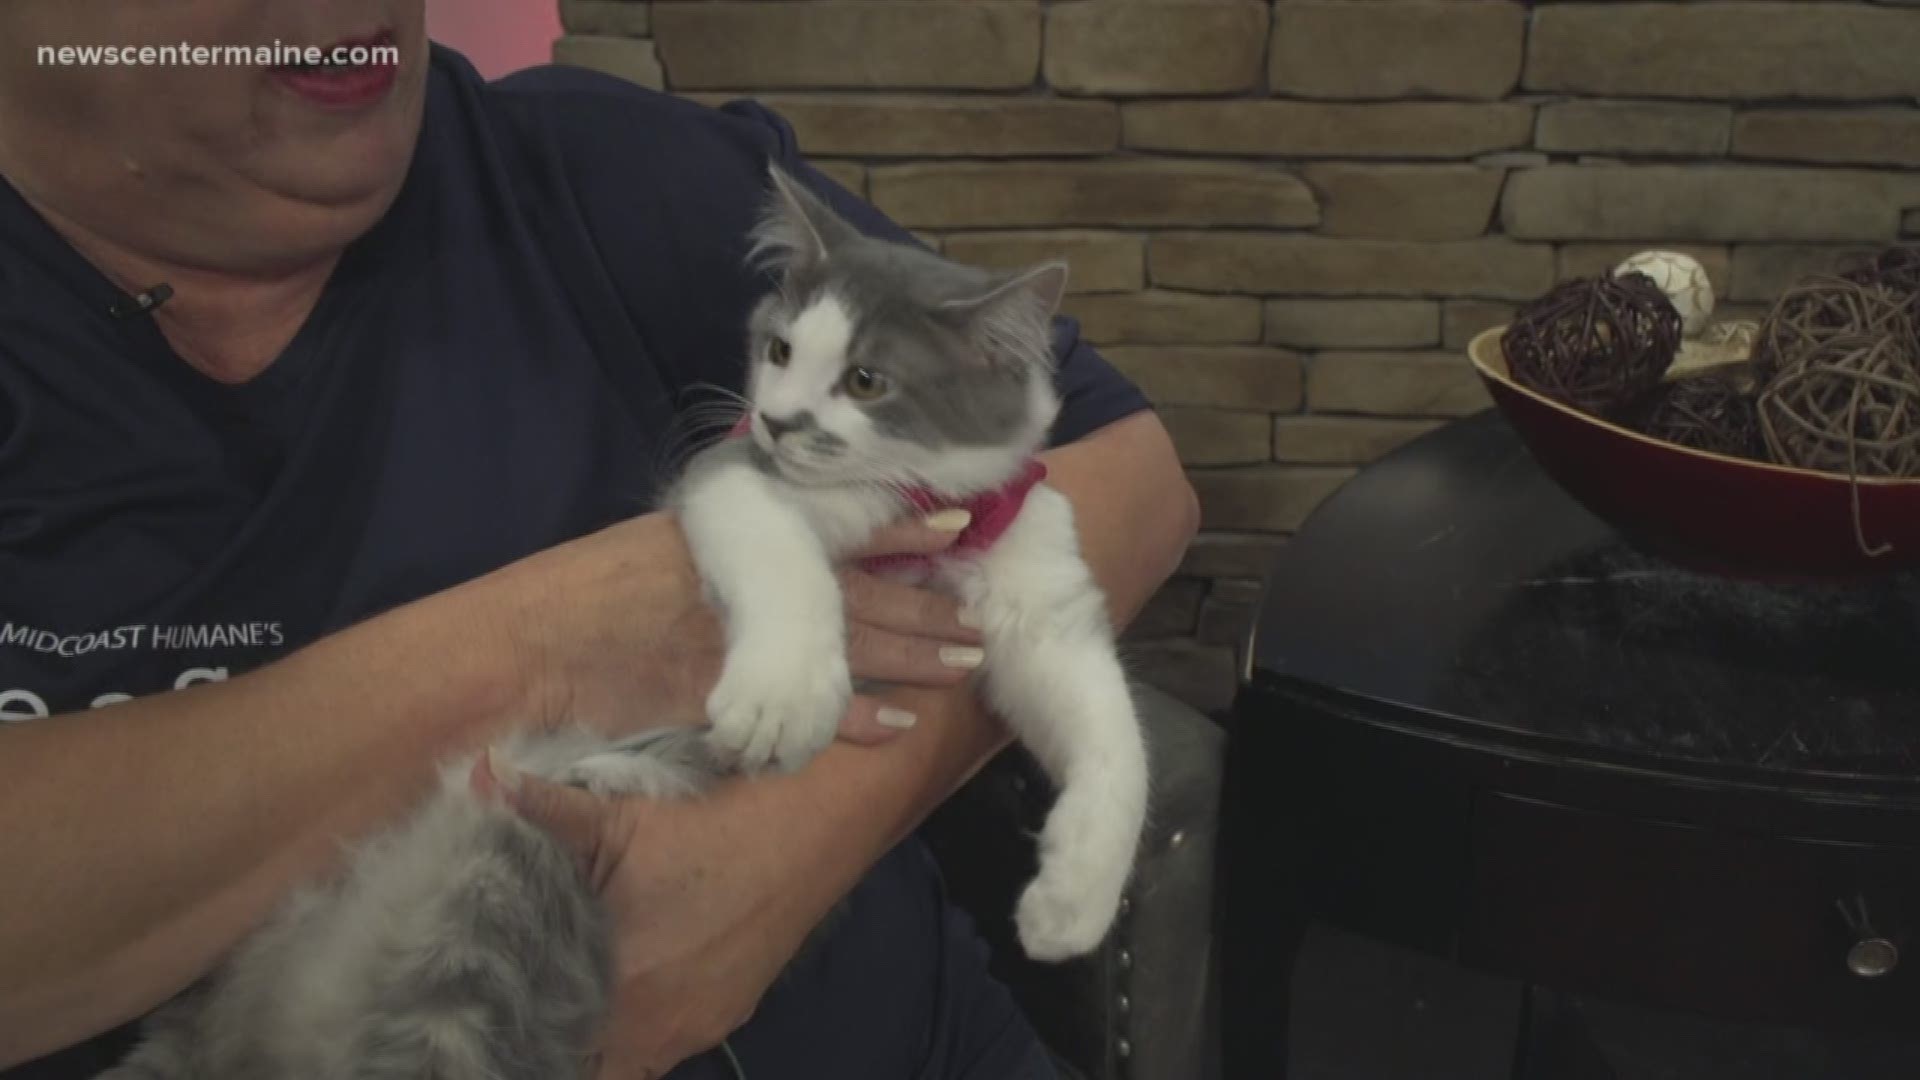 Shiitake the cat is available for adoption through Midcoast Humane.